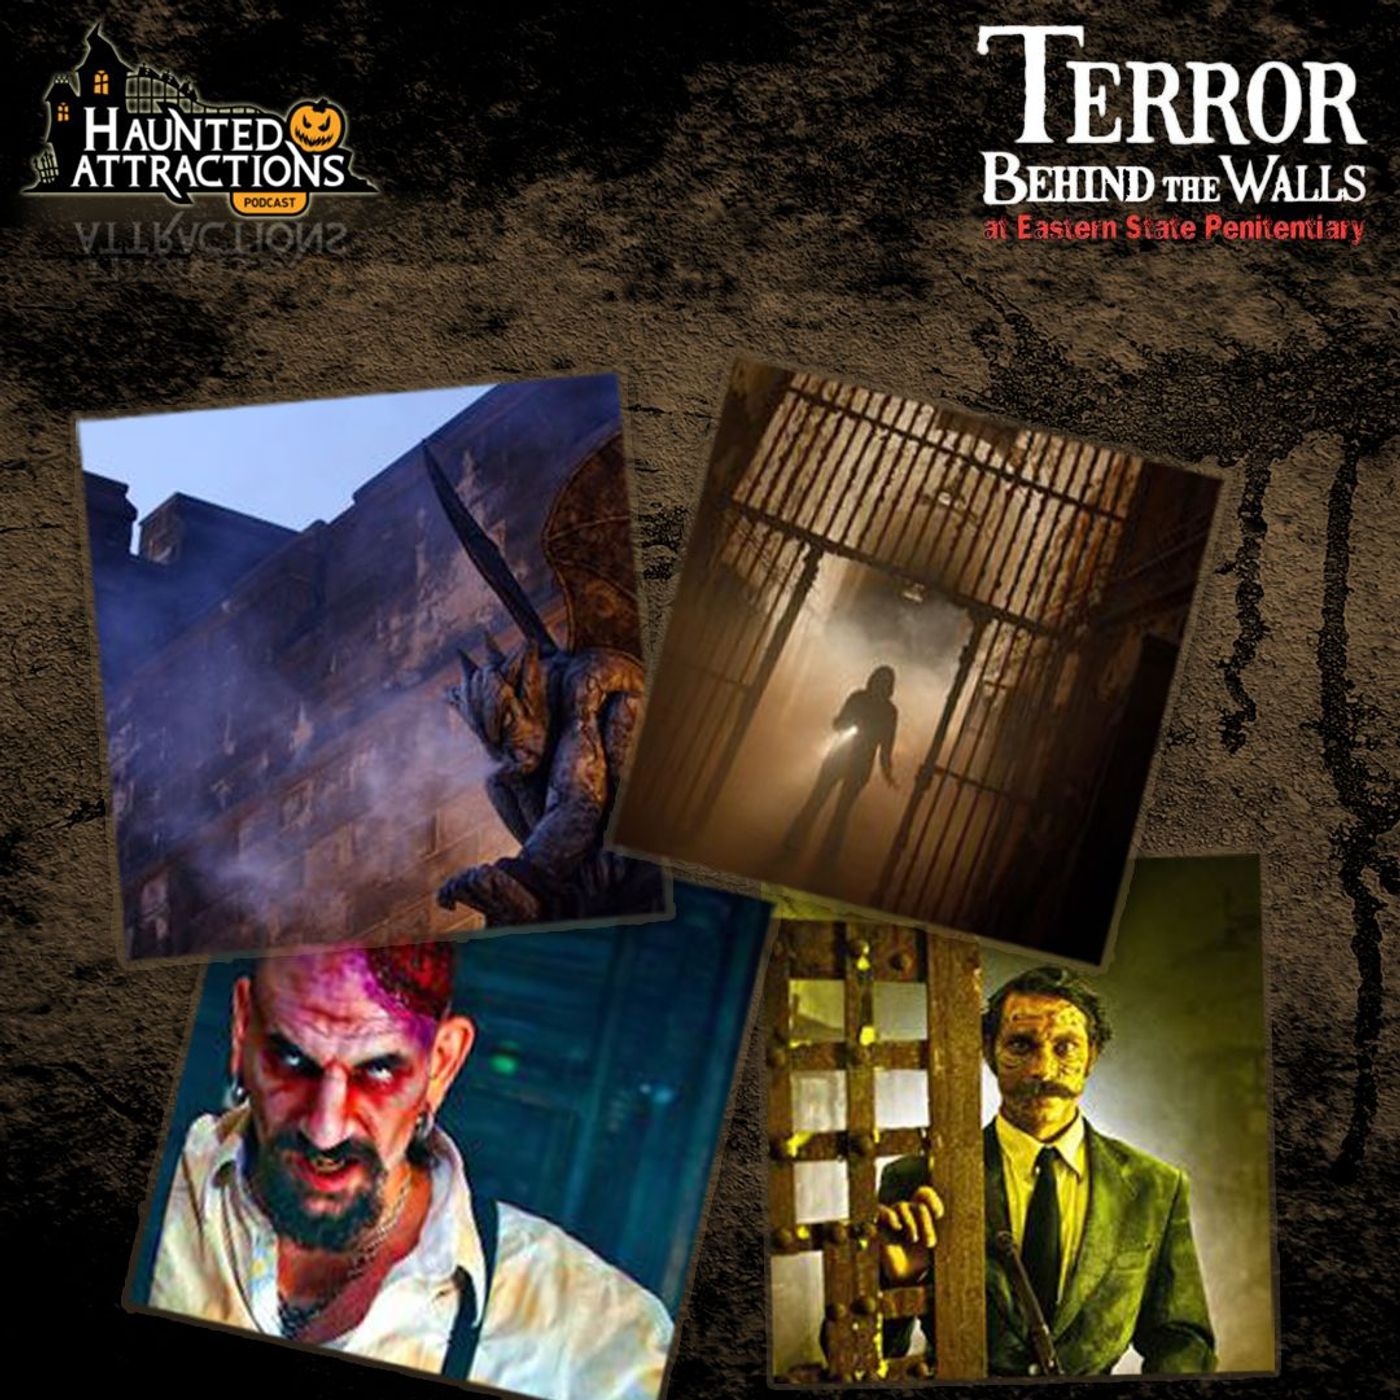 Terror Behind the Walls at Eastern State Penitentiary in Philadelphia, PA